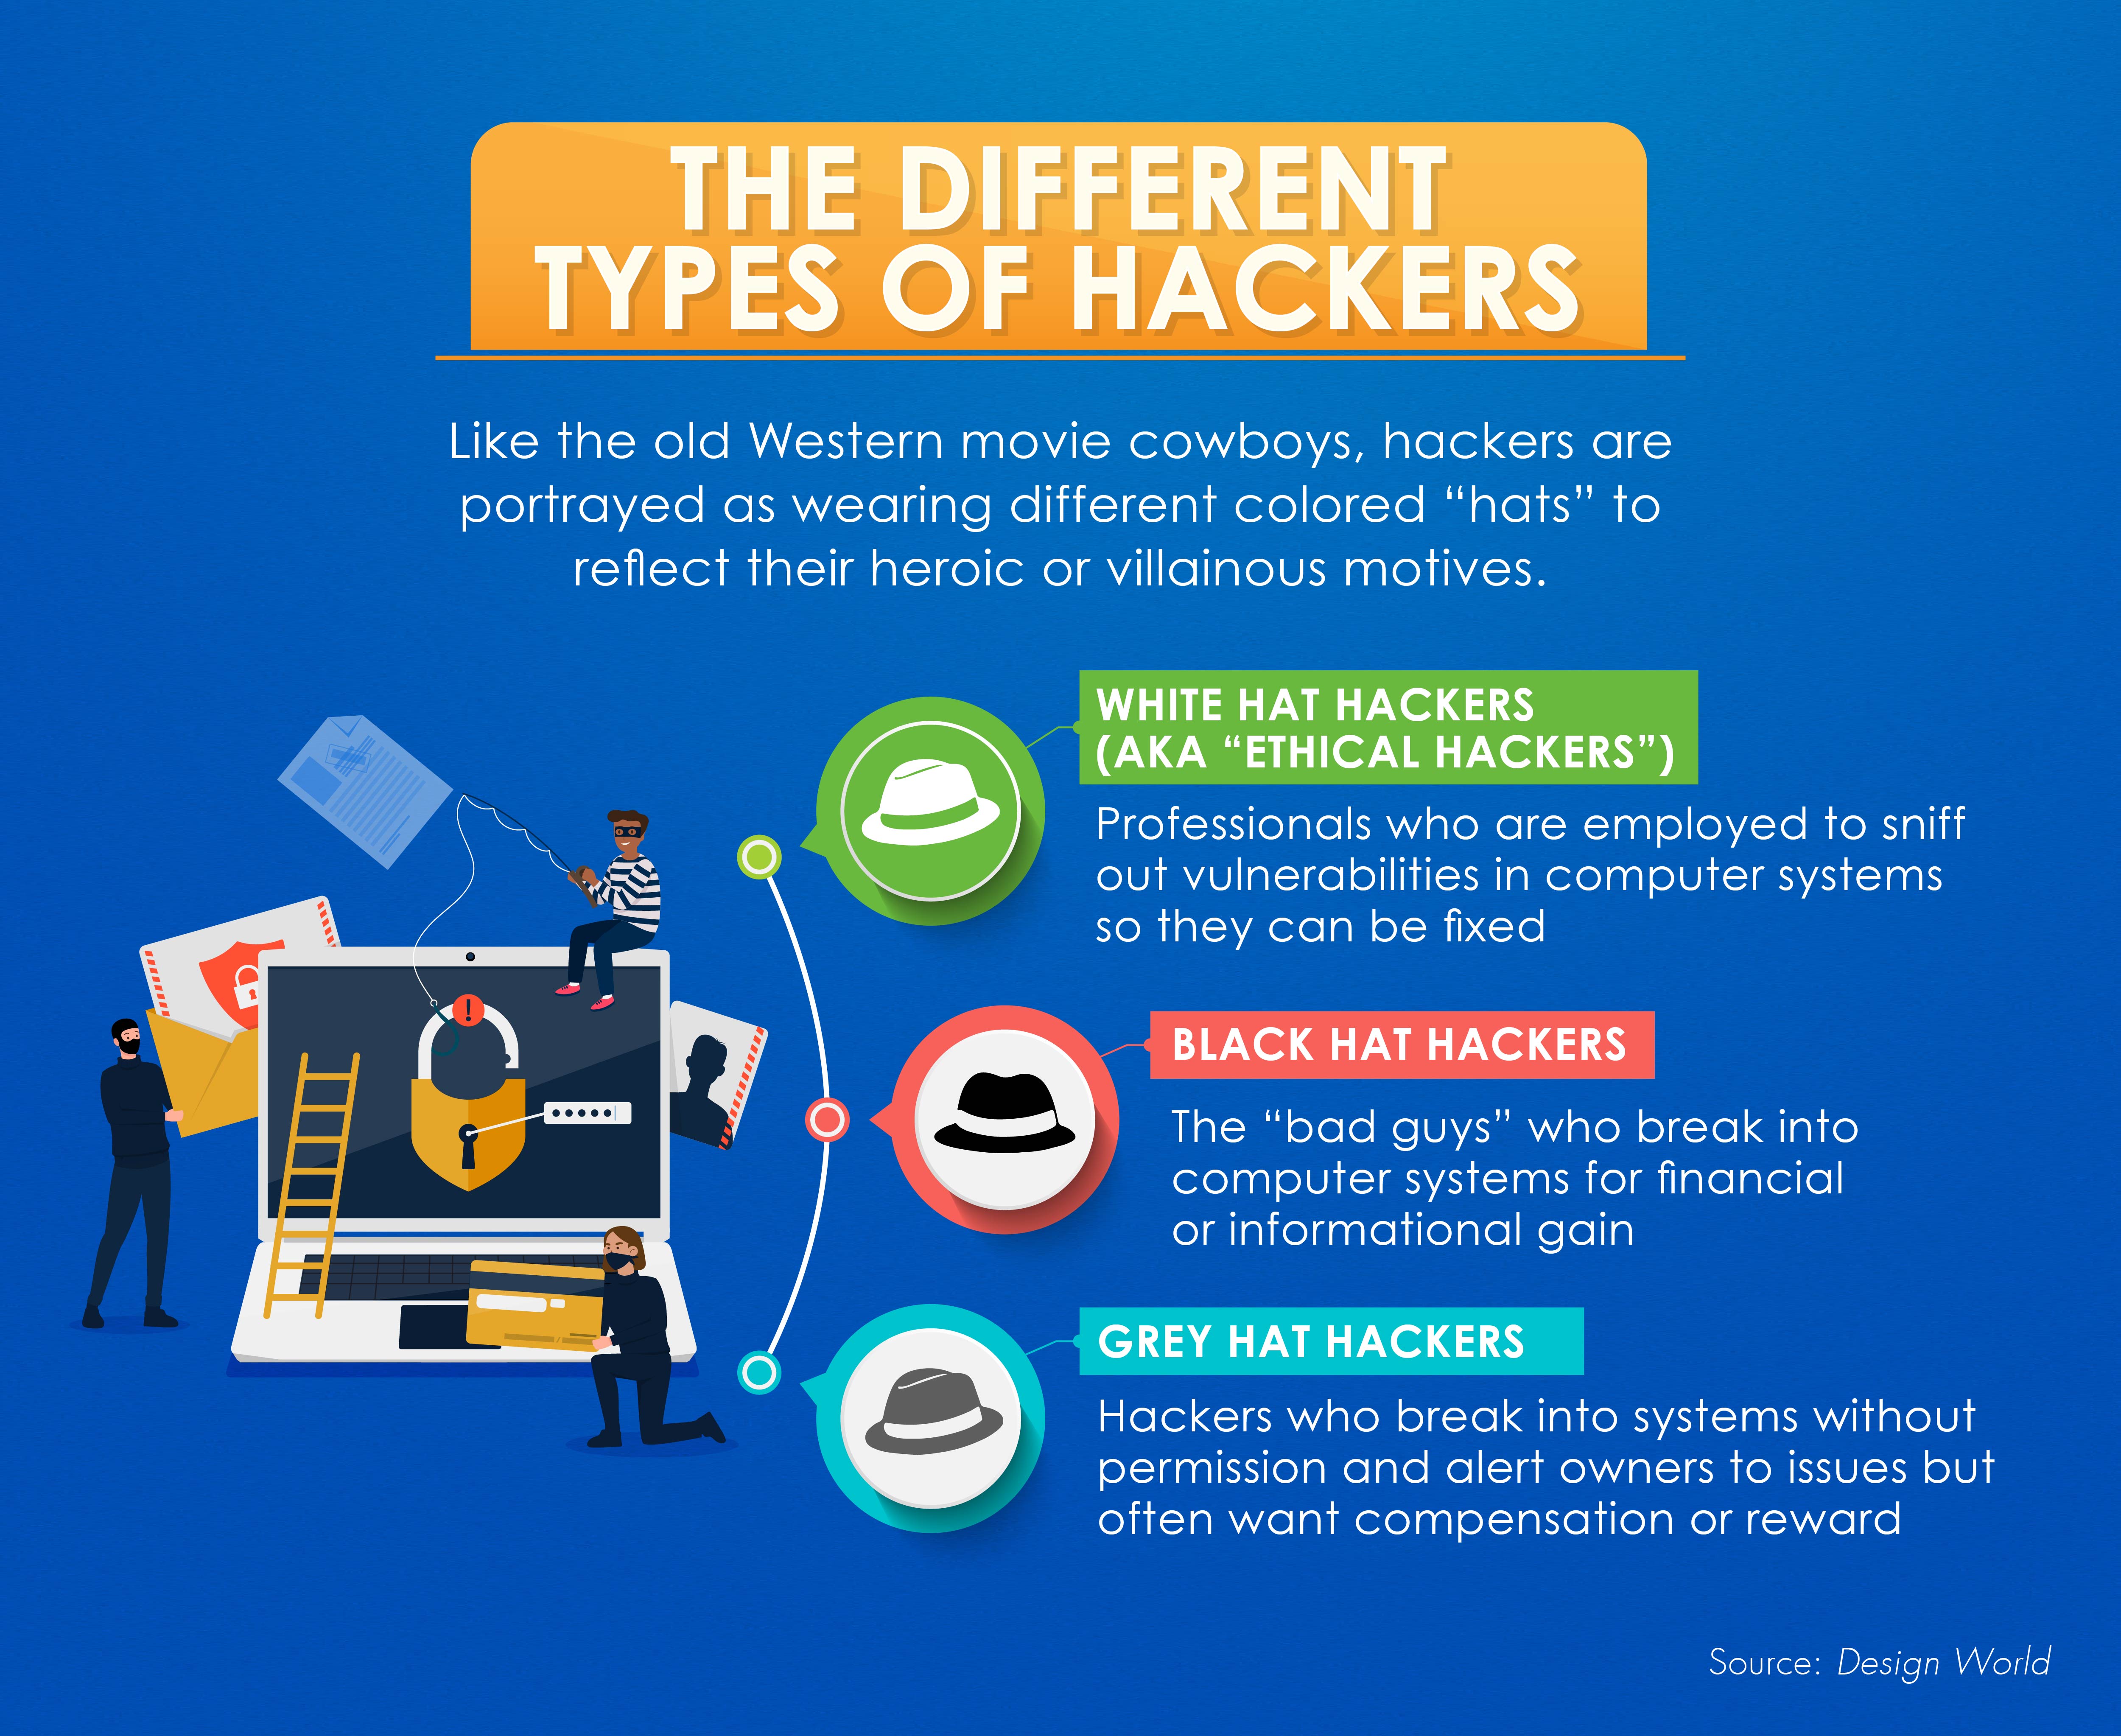 Definitions for white hat, black hat, and grey hat hackers.